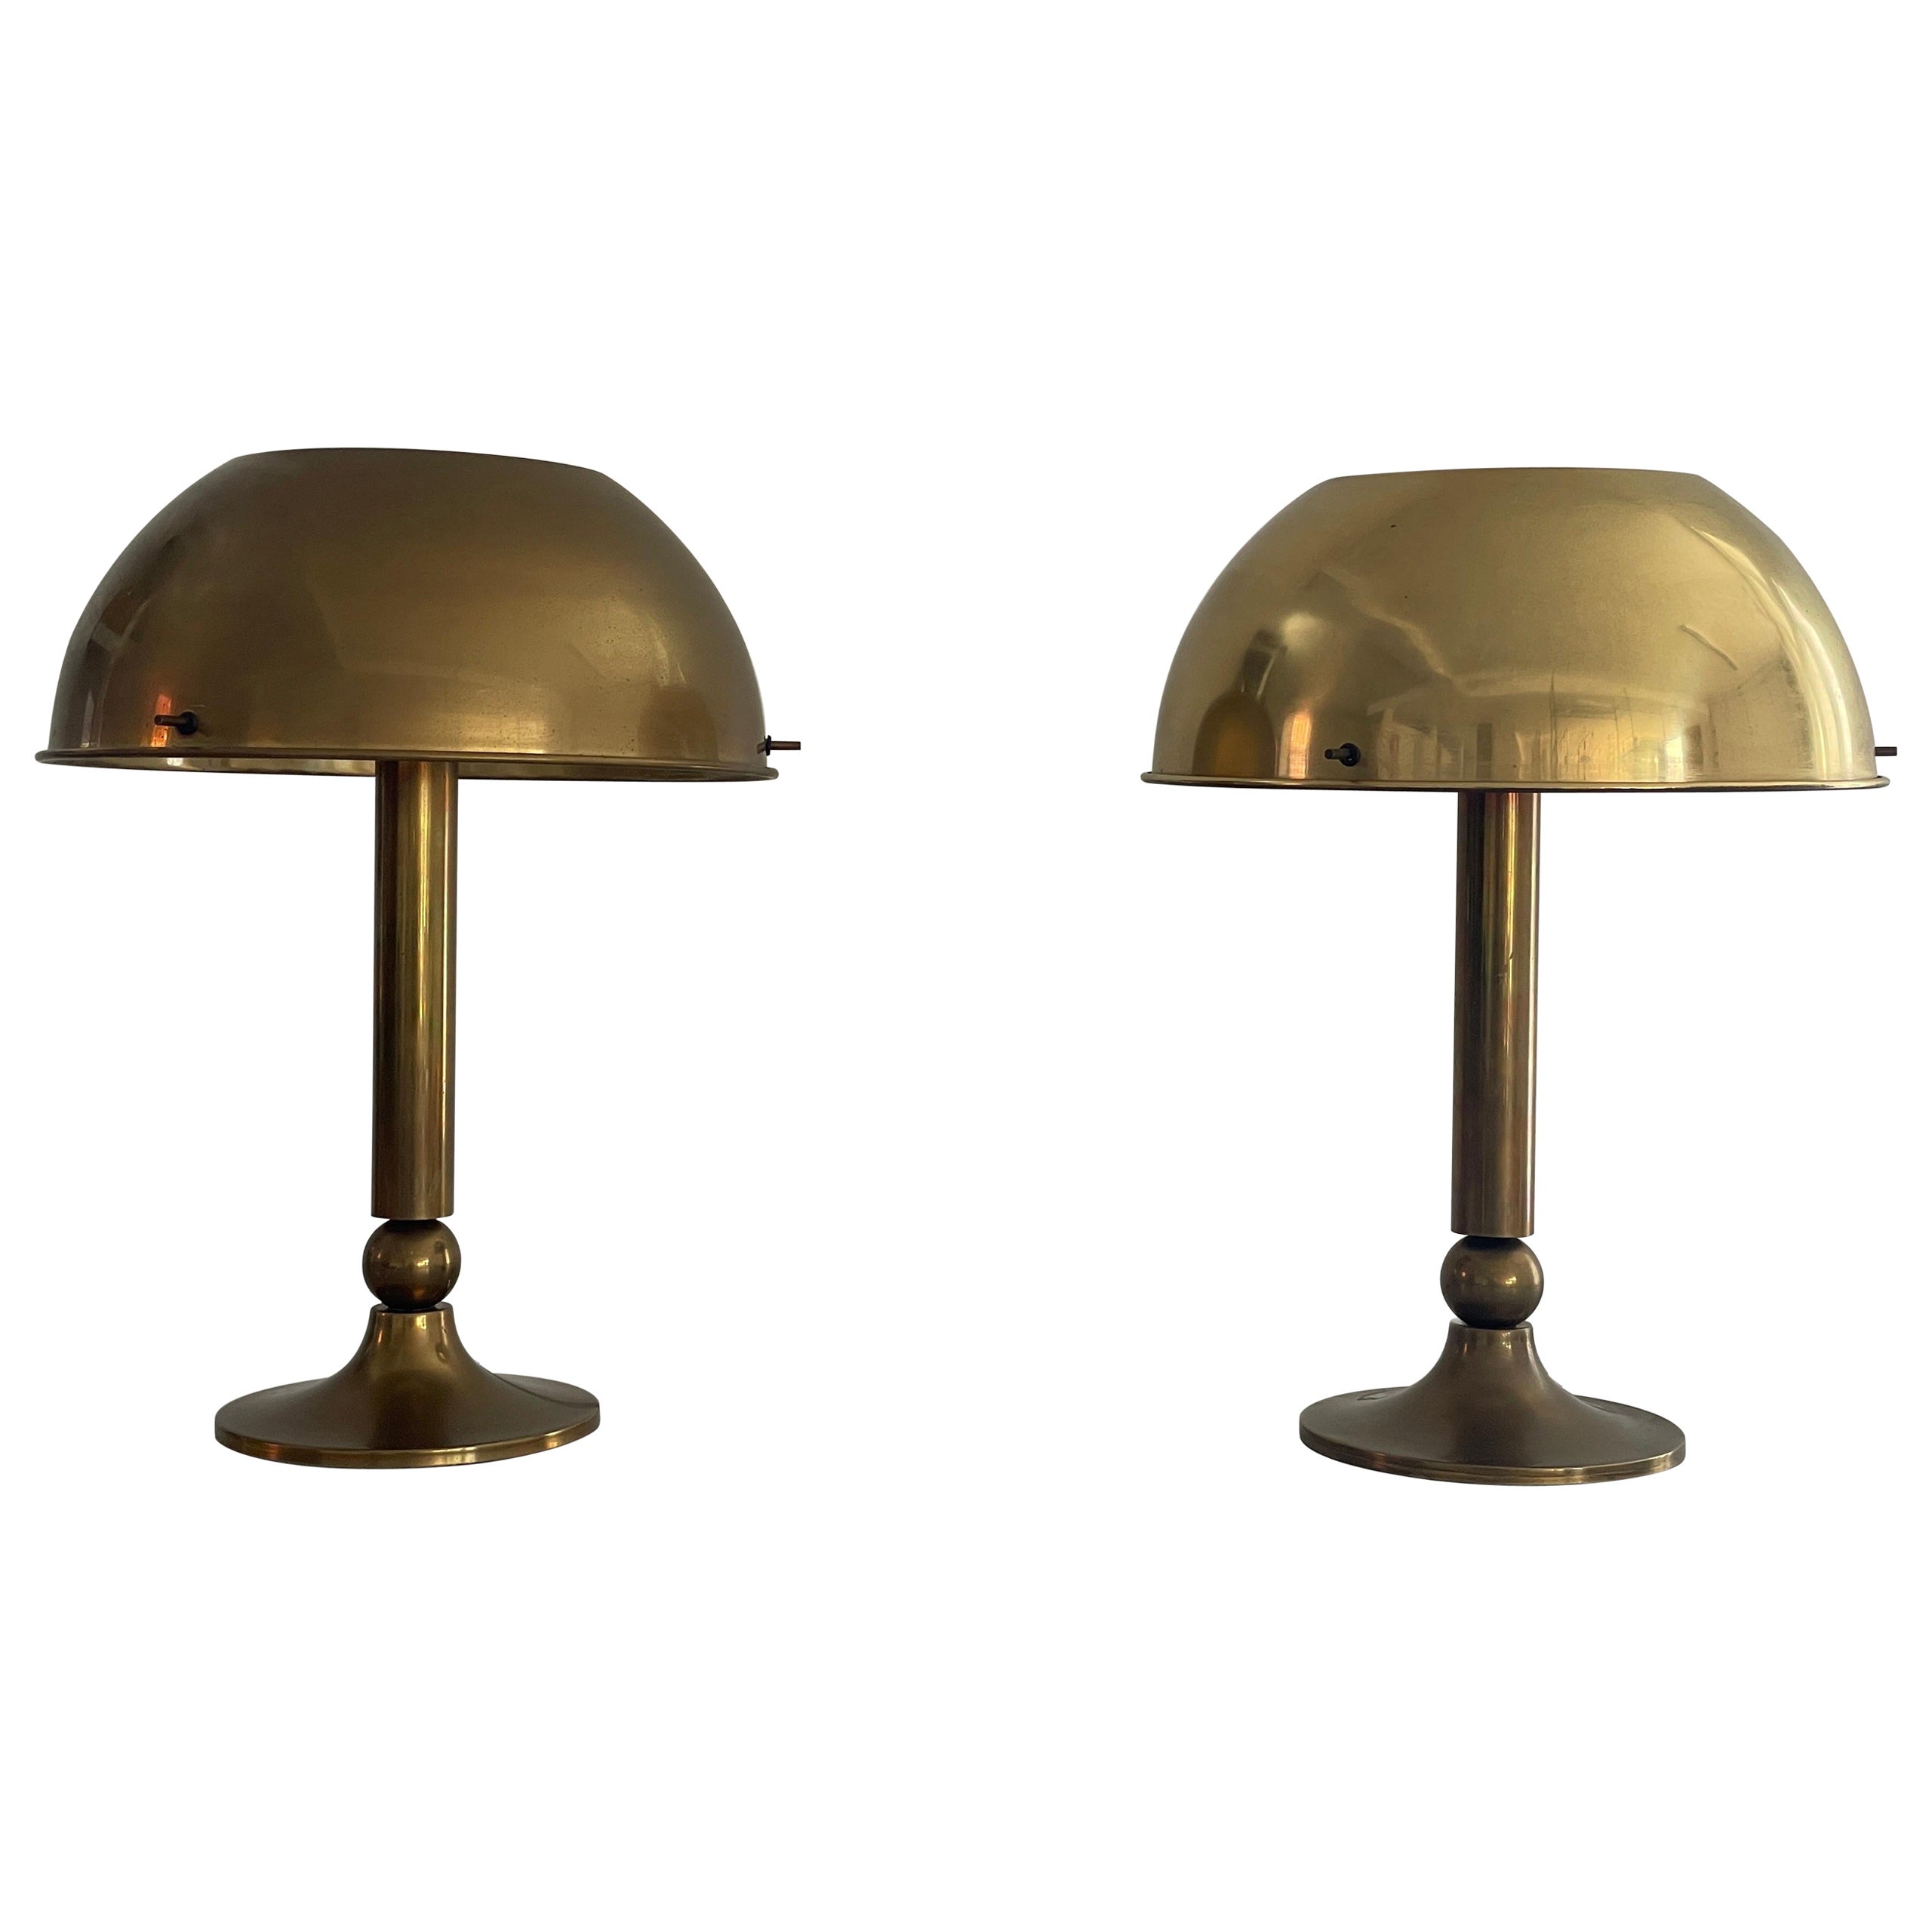 Mid-century Modern Brass Pair of Table Lamps by Florian Schulz, 1970s, Germany For Sale